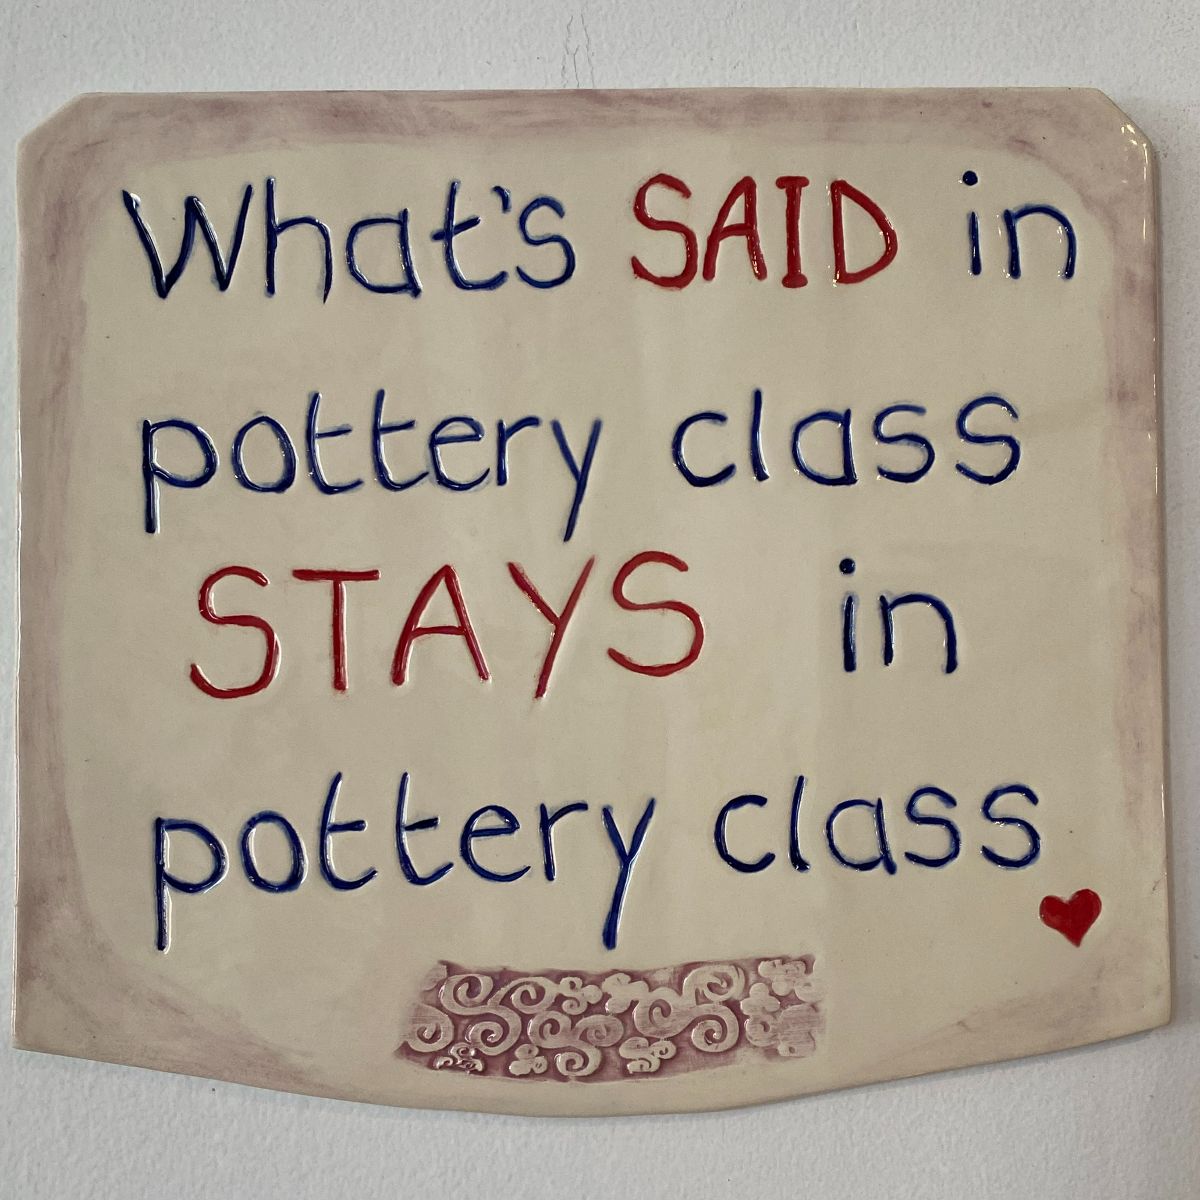 What is said in pottery class